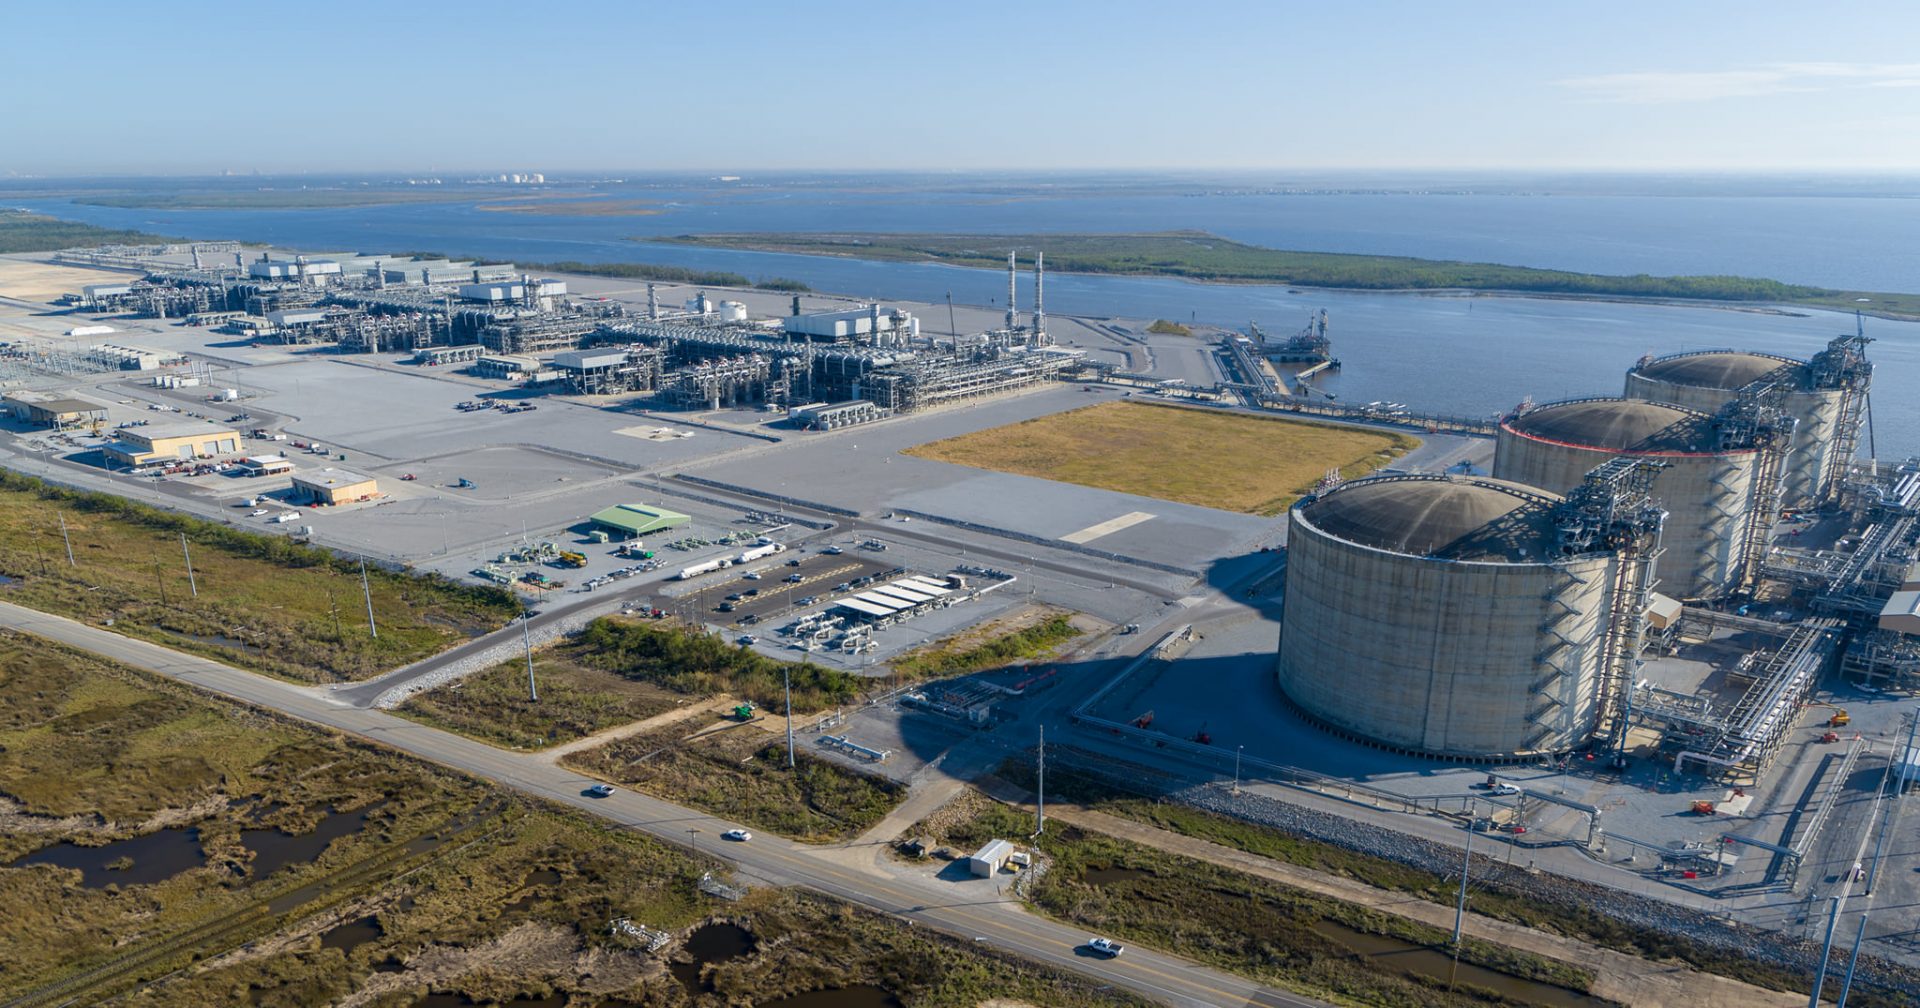 Cameron LNG says CEO to retire